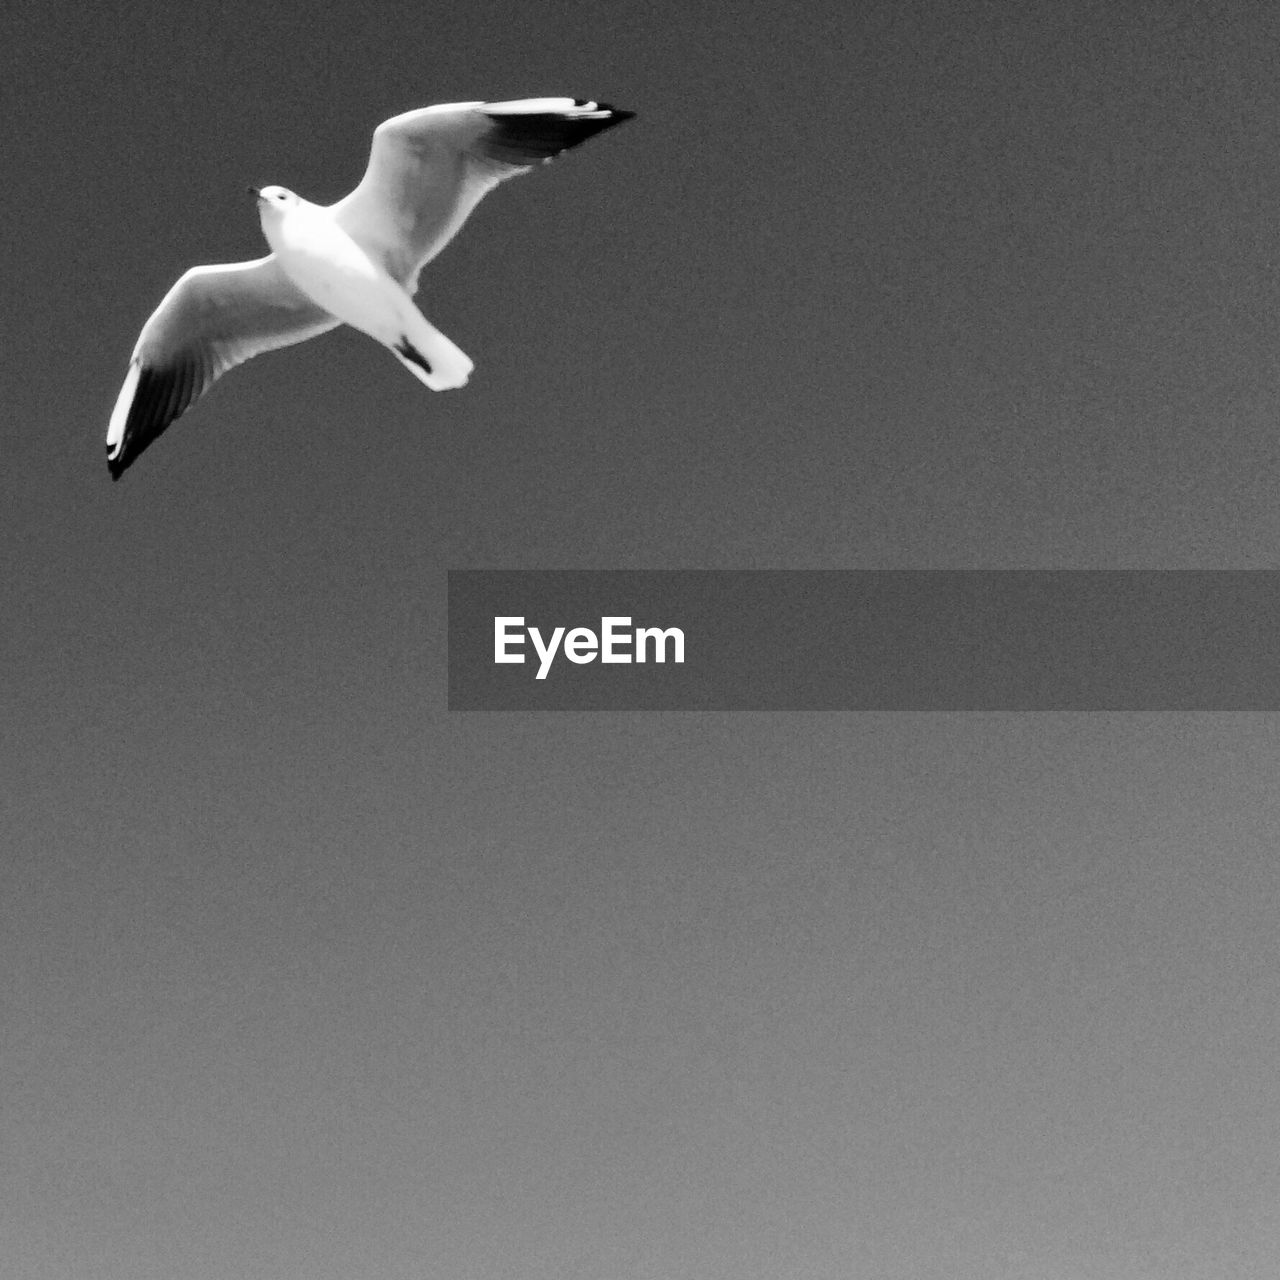 Low angle view of seagull flying in clear sky